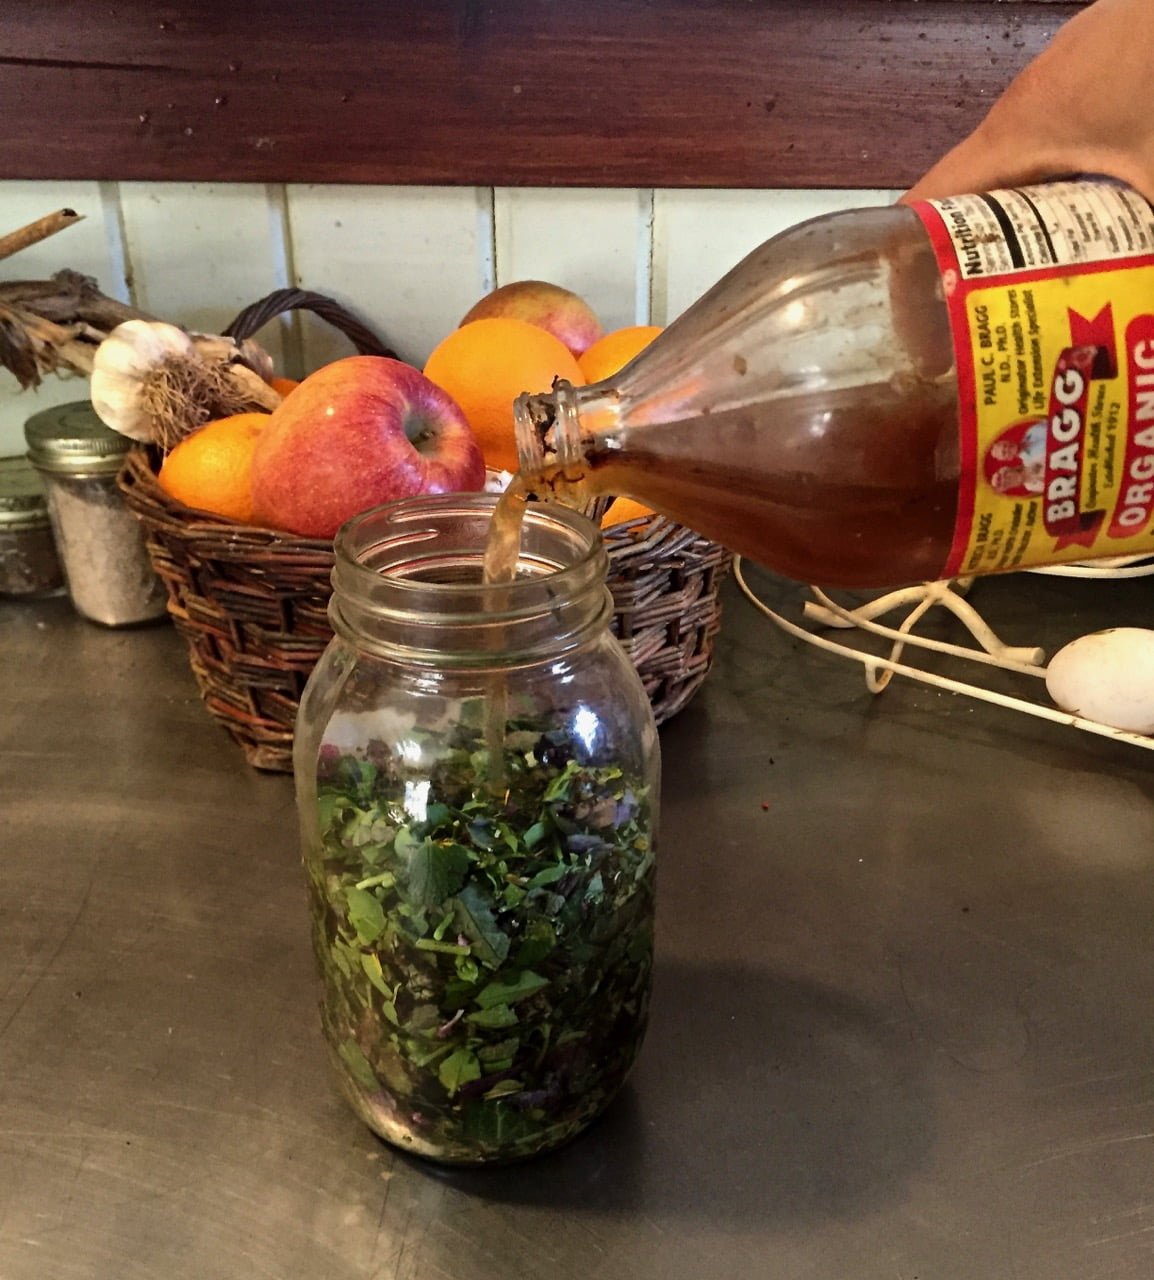 pouring vinegar over herbs in a bottle